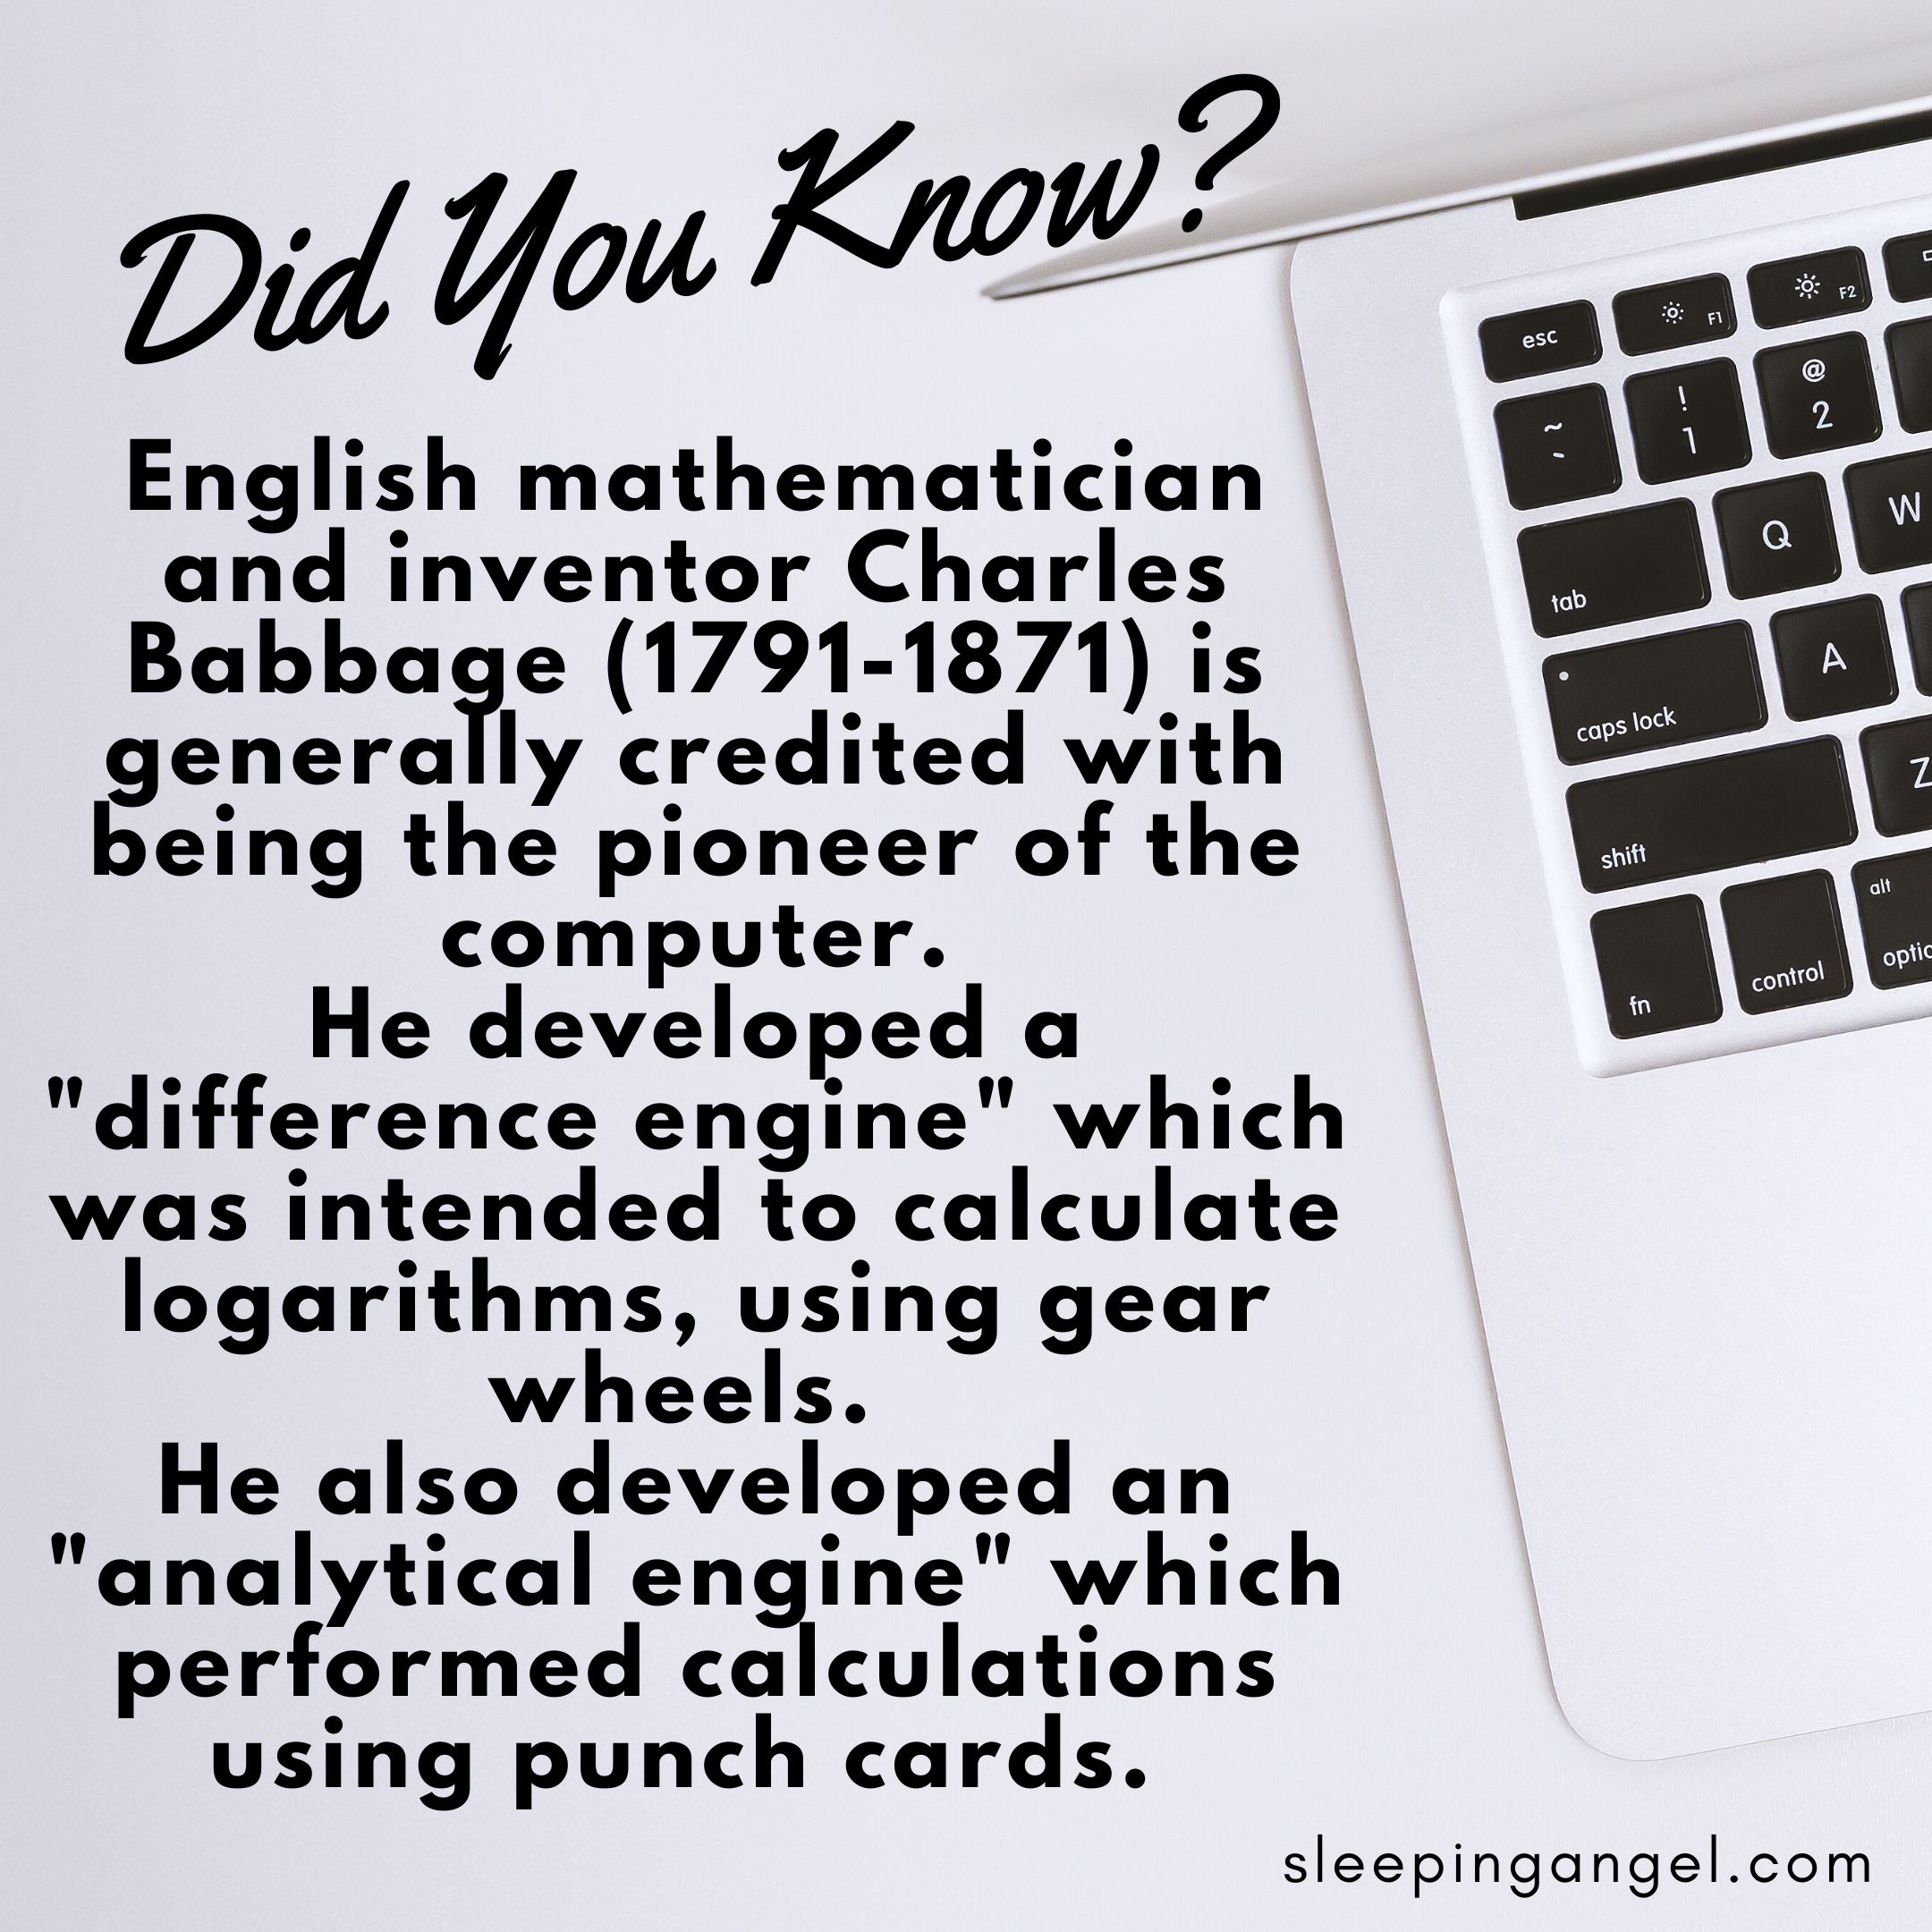 Did You Know? The Pioneer of the Computer